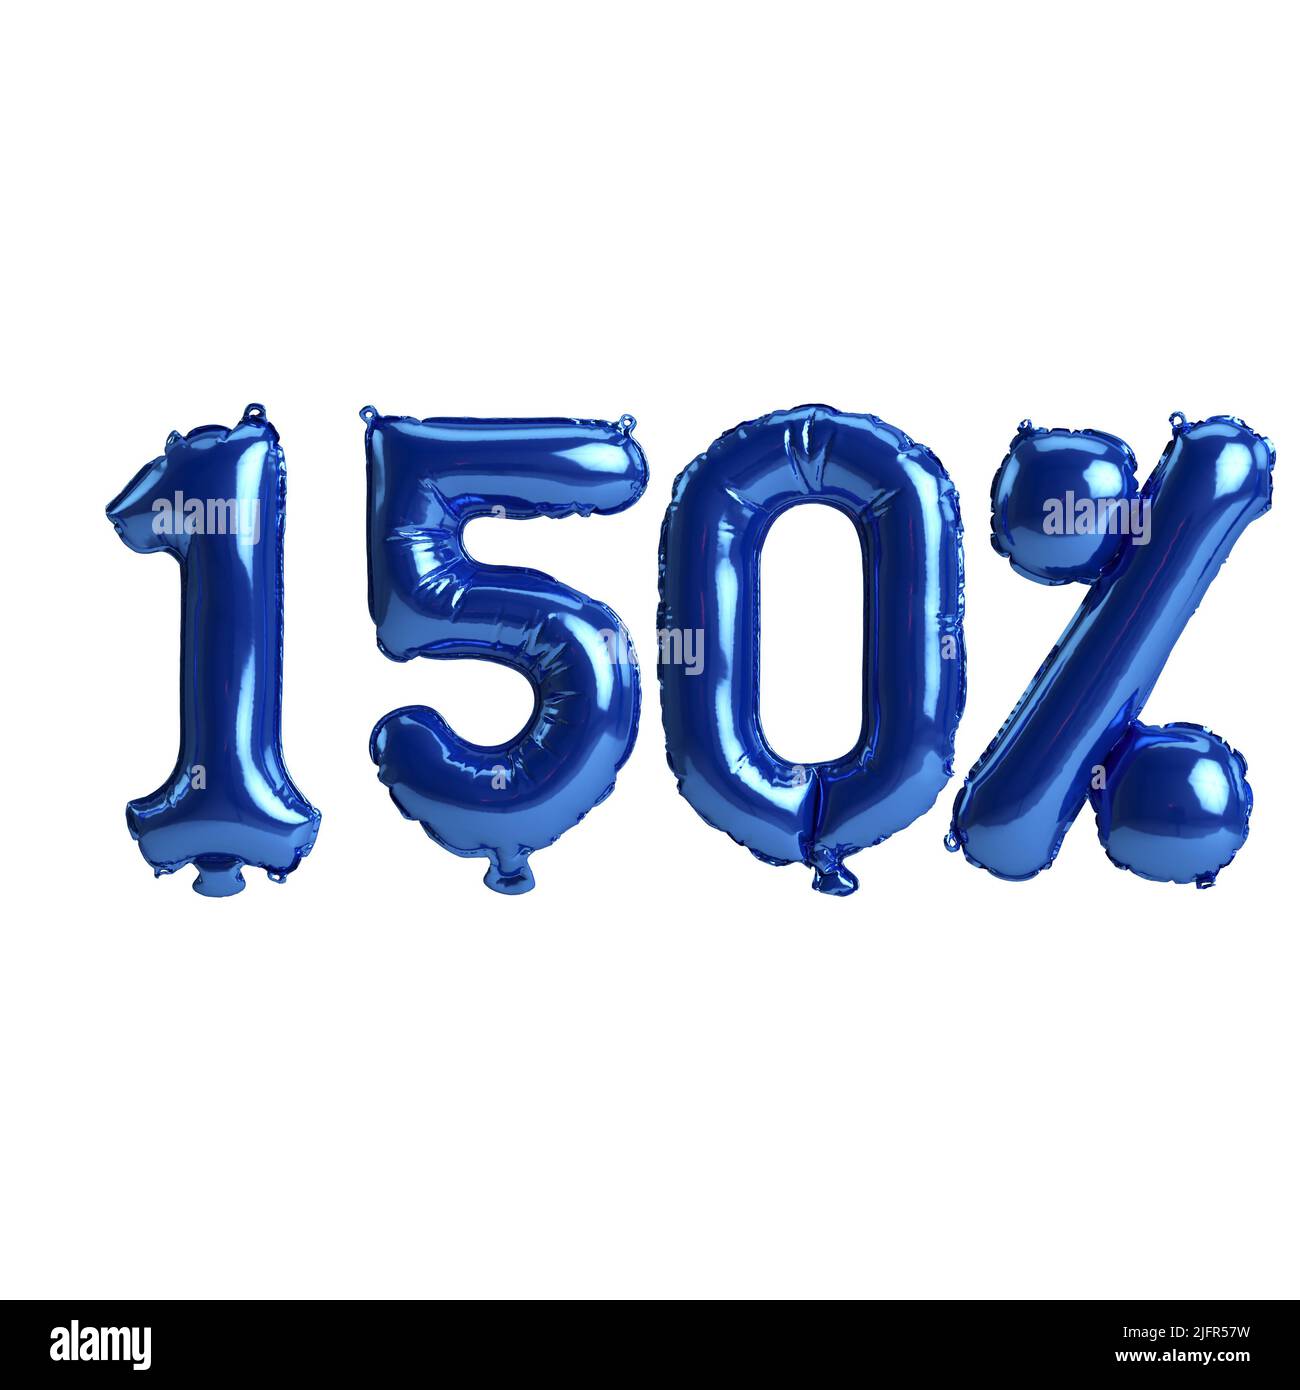 3d illustration of 150 percent blue balloons isolated on white background Stock Photo